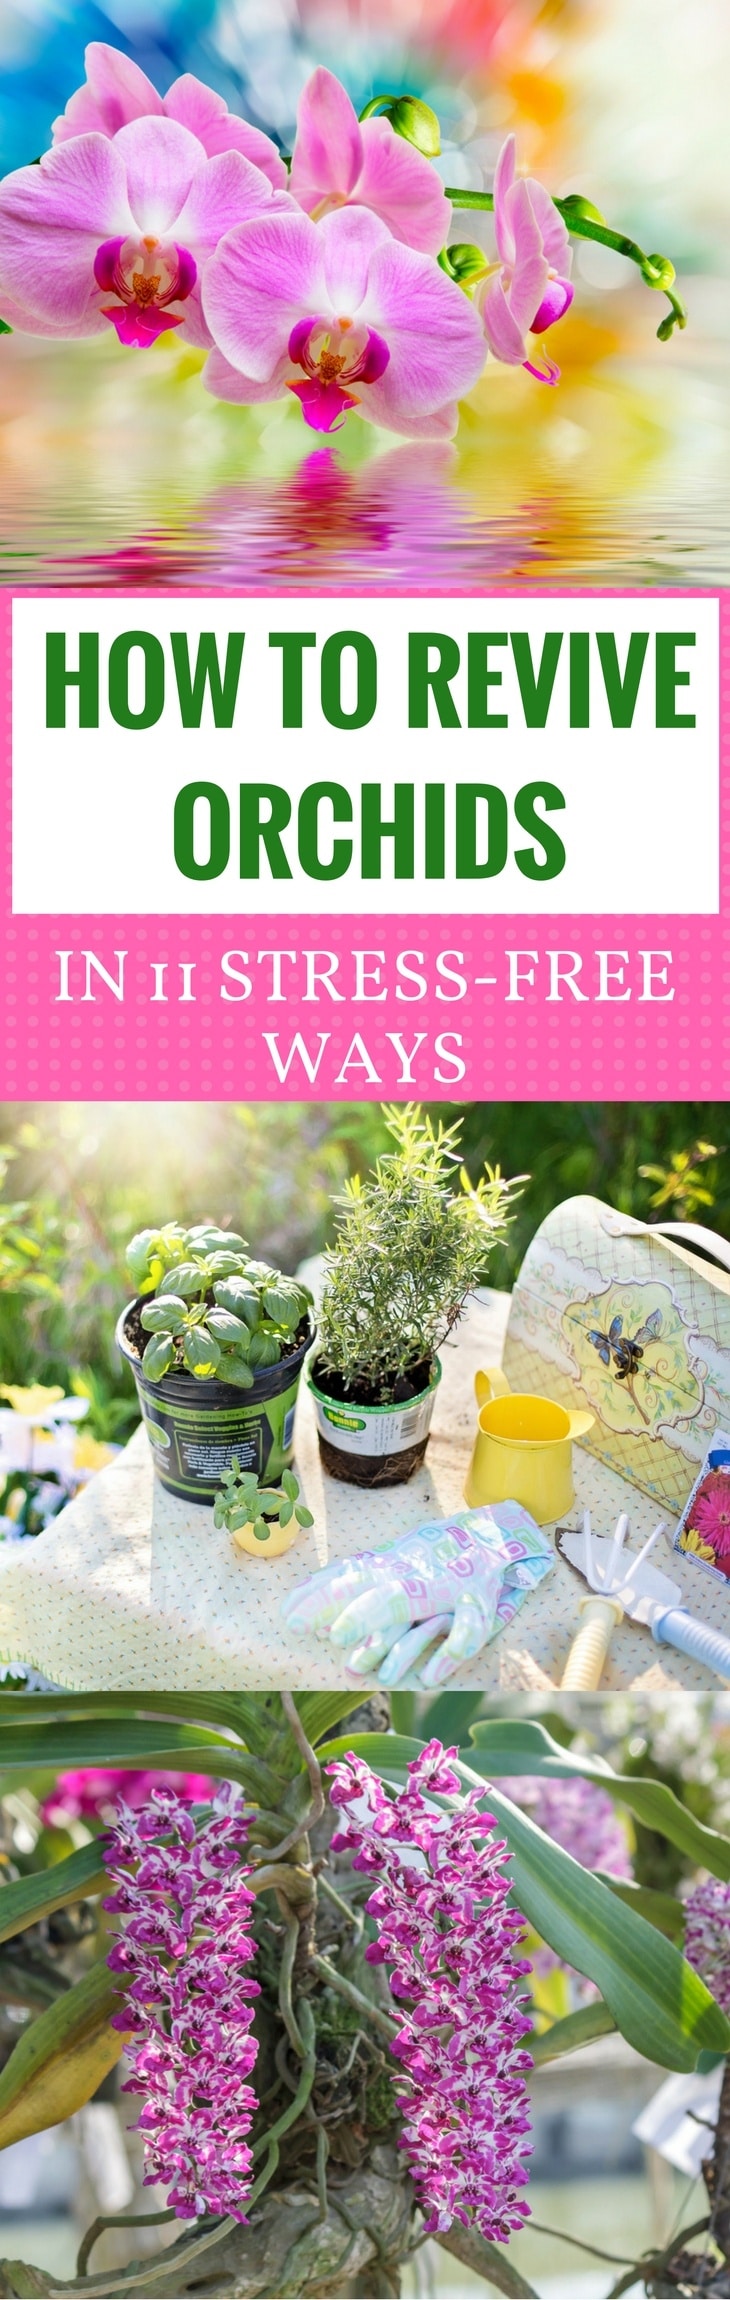 How To Revive Orchids In 11 Stress-Free Ways pin it